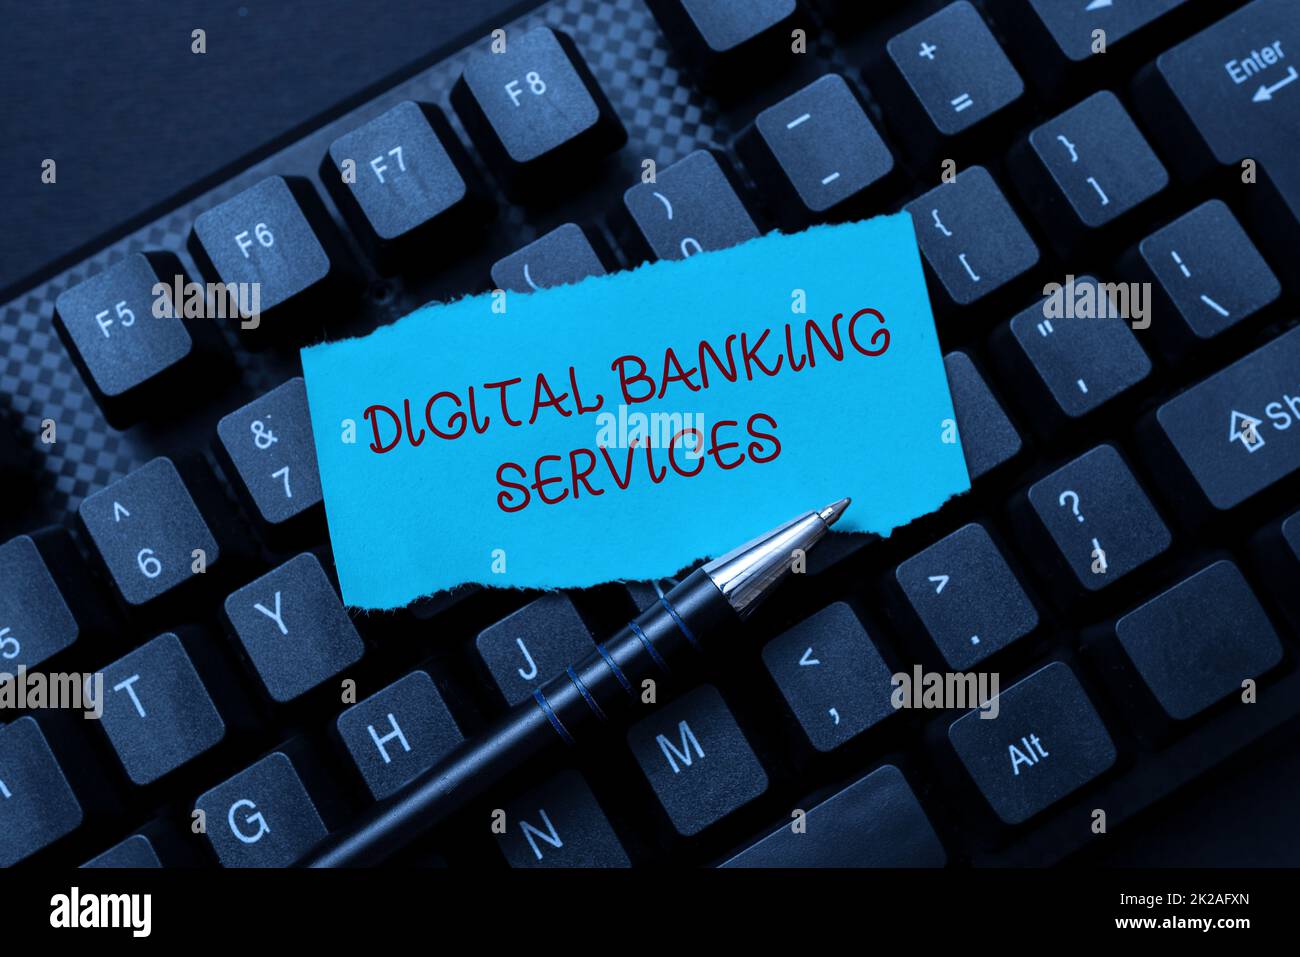 Text caption presenting Digital Banking Services. Business overview Business, technology, internet and networking Setting Up New Online Blog Website, Typing Meaningful Internet Content Stock Photo